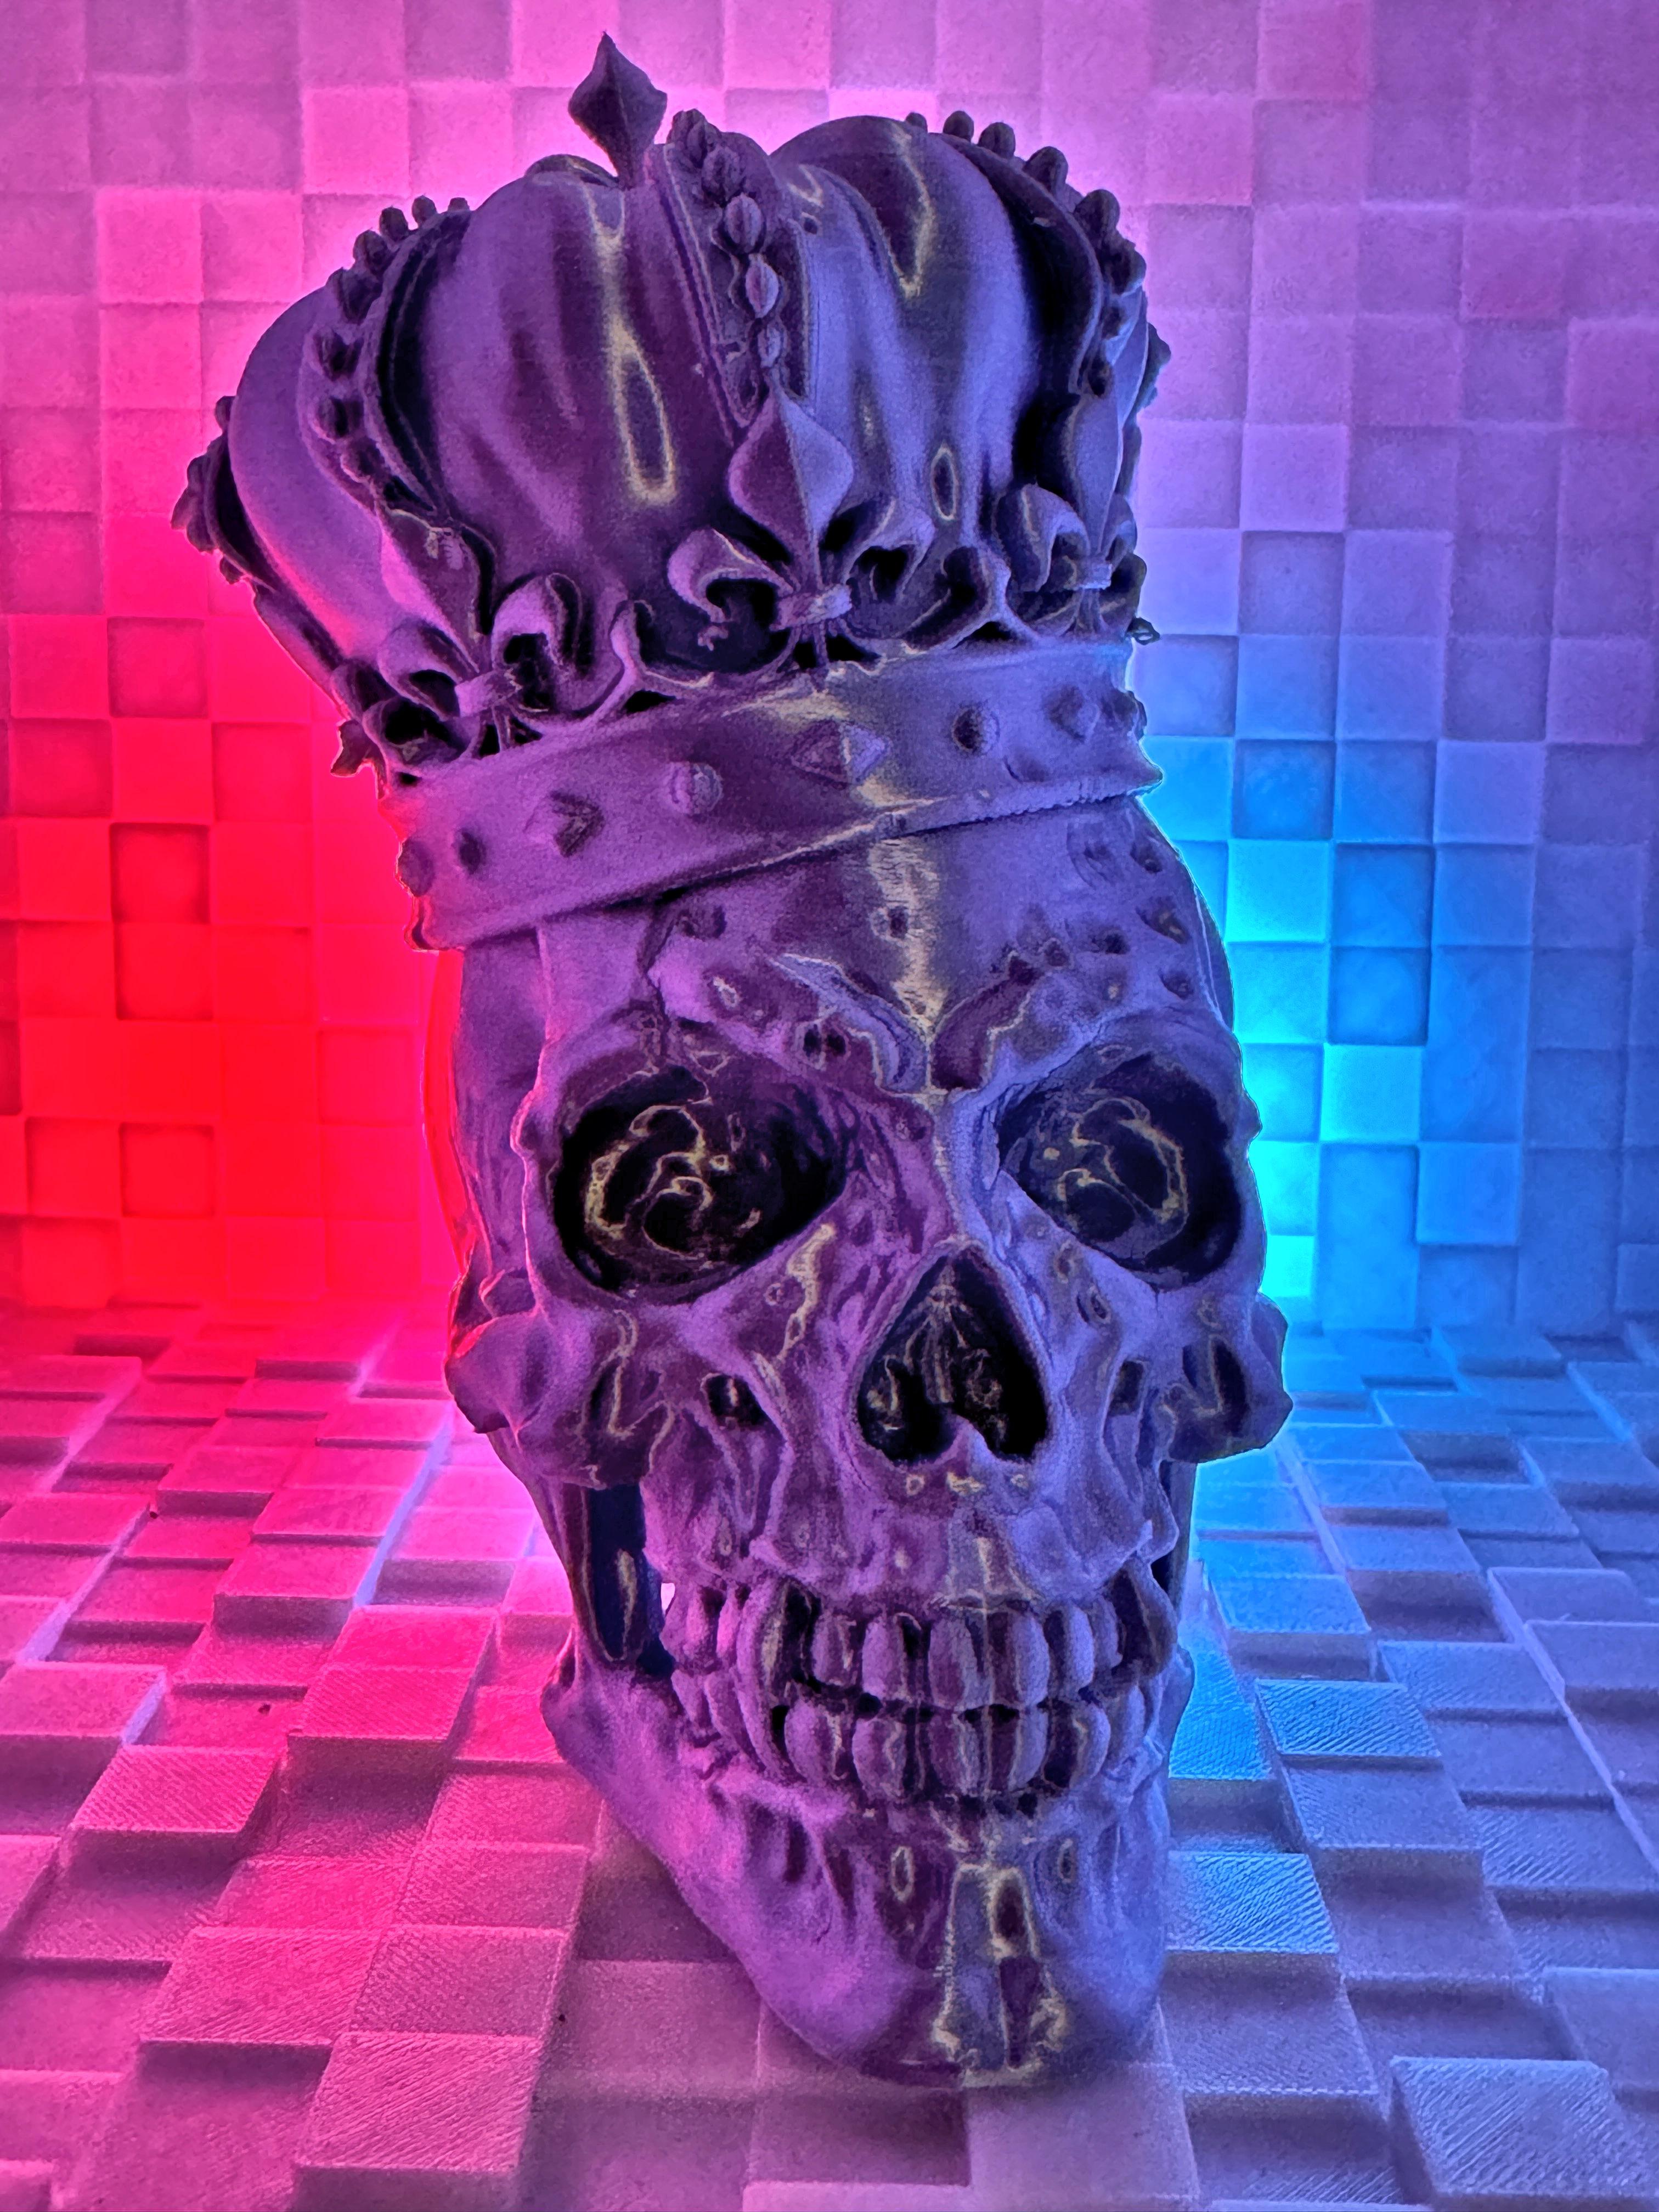 Skull with Crown - Home Decor 3d model